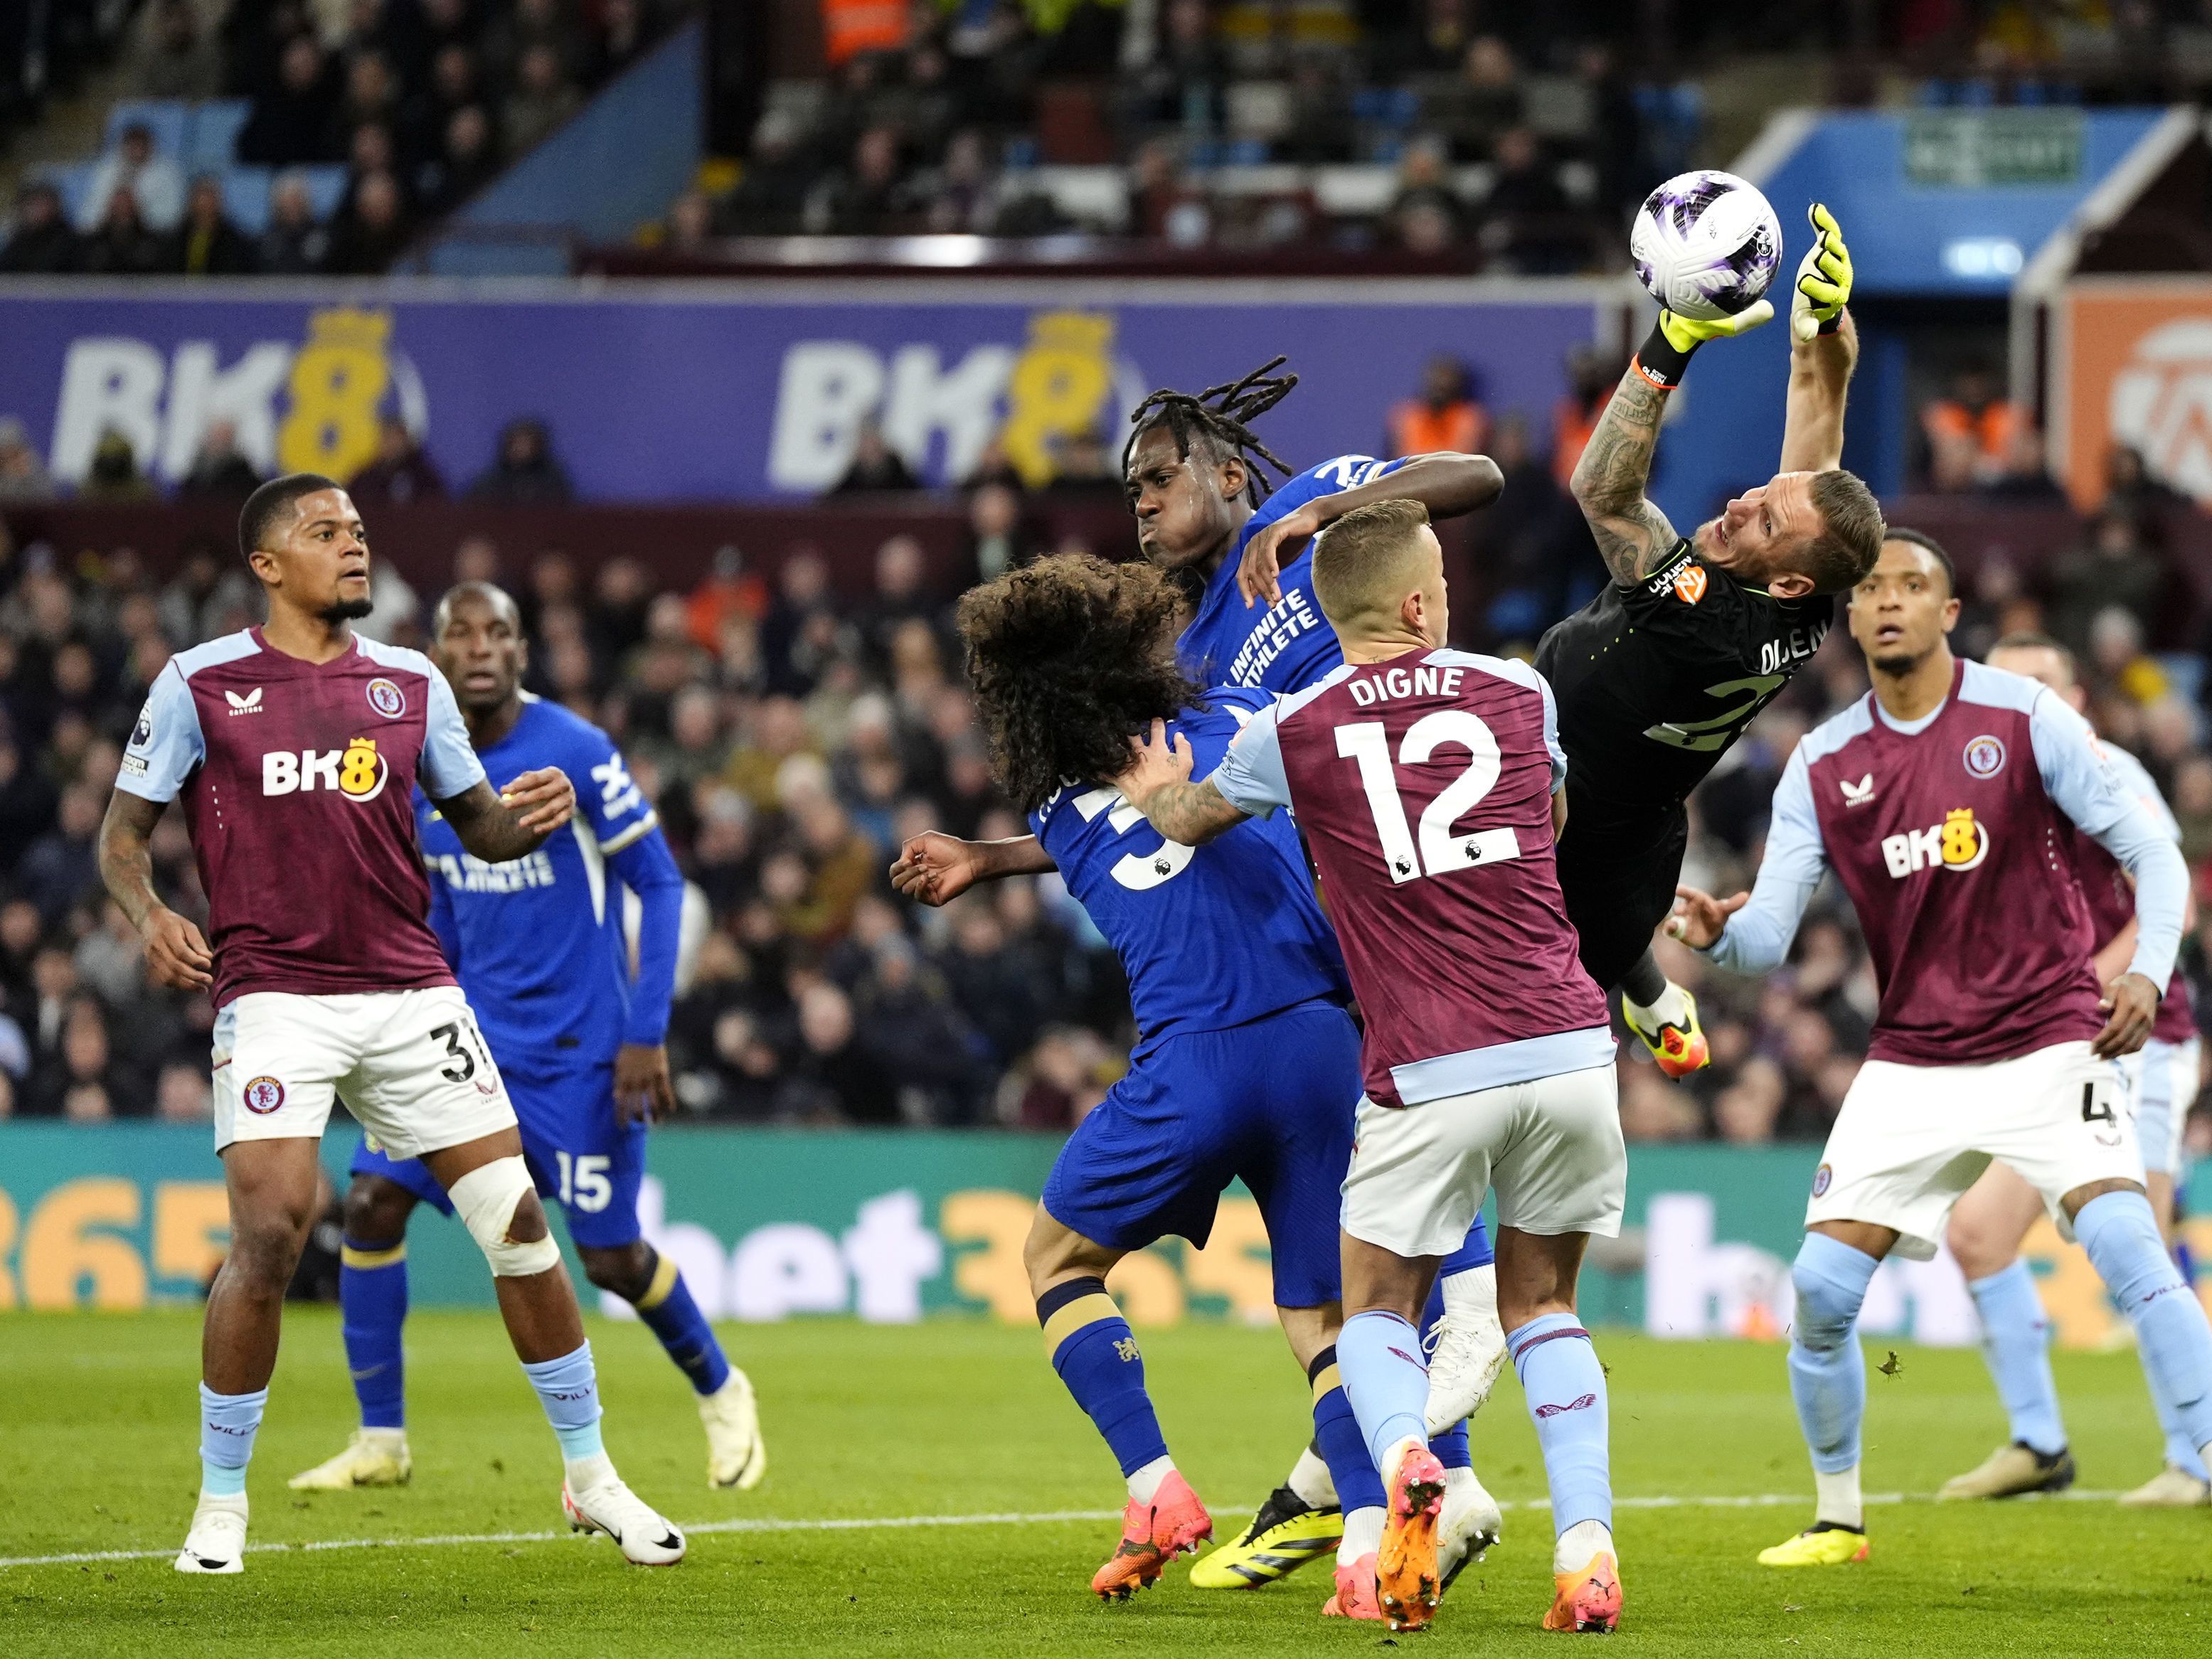 Aston Villa must finish fourth for Champions League slot after Premier League miss out on extra place